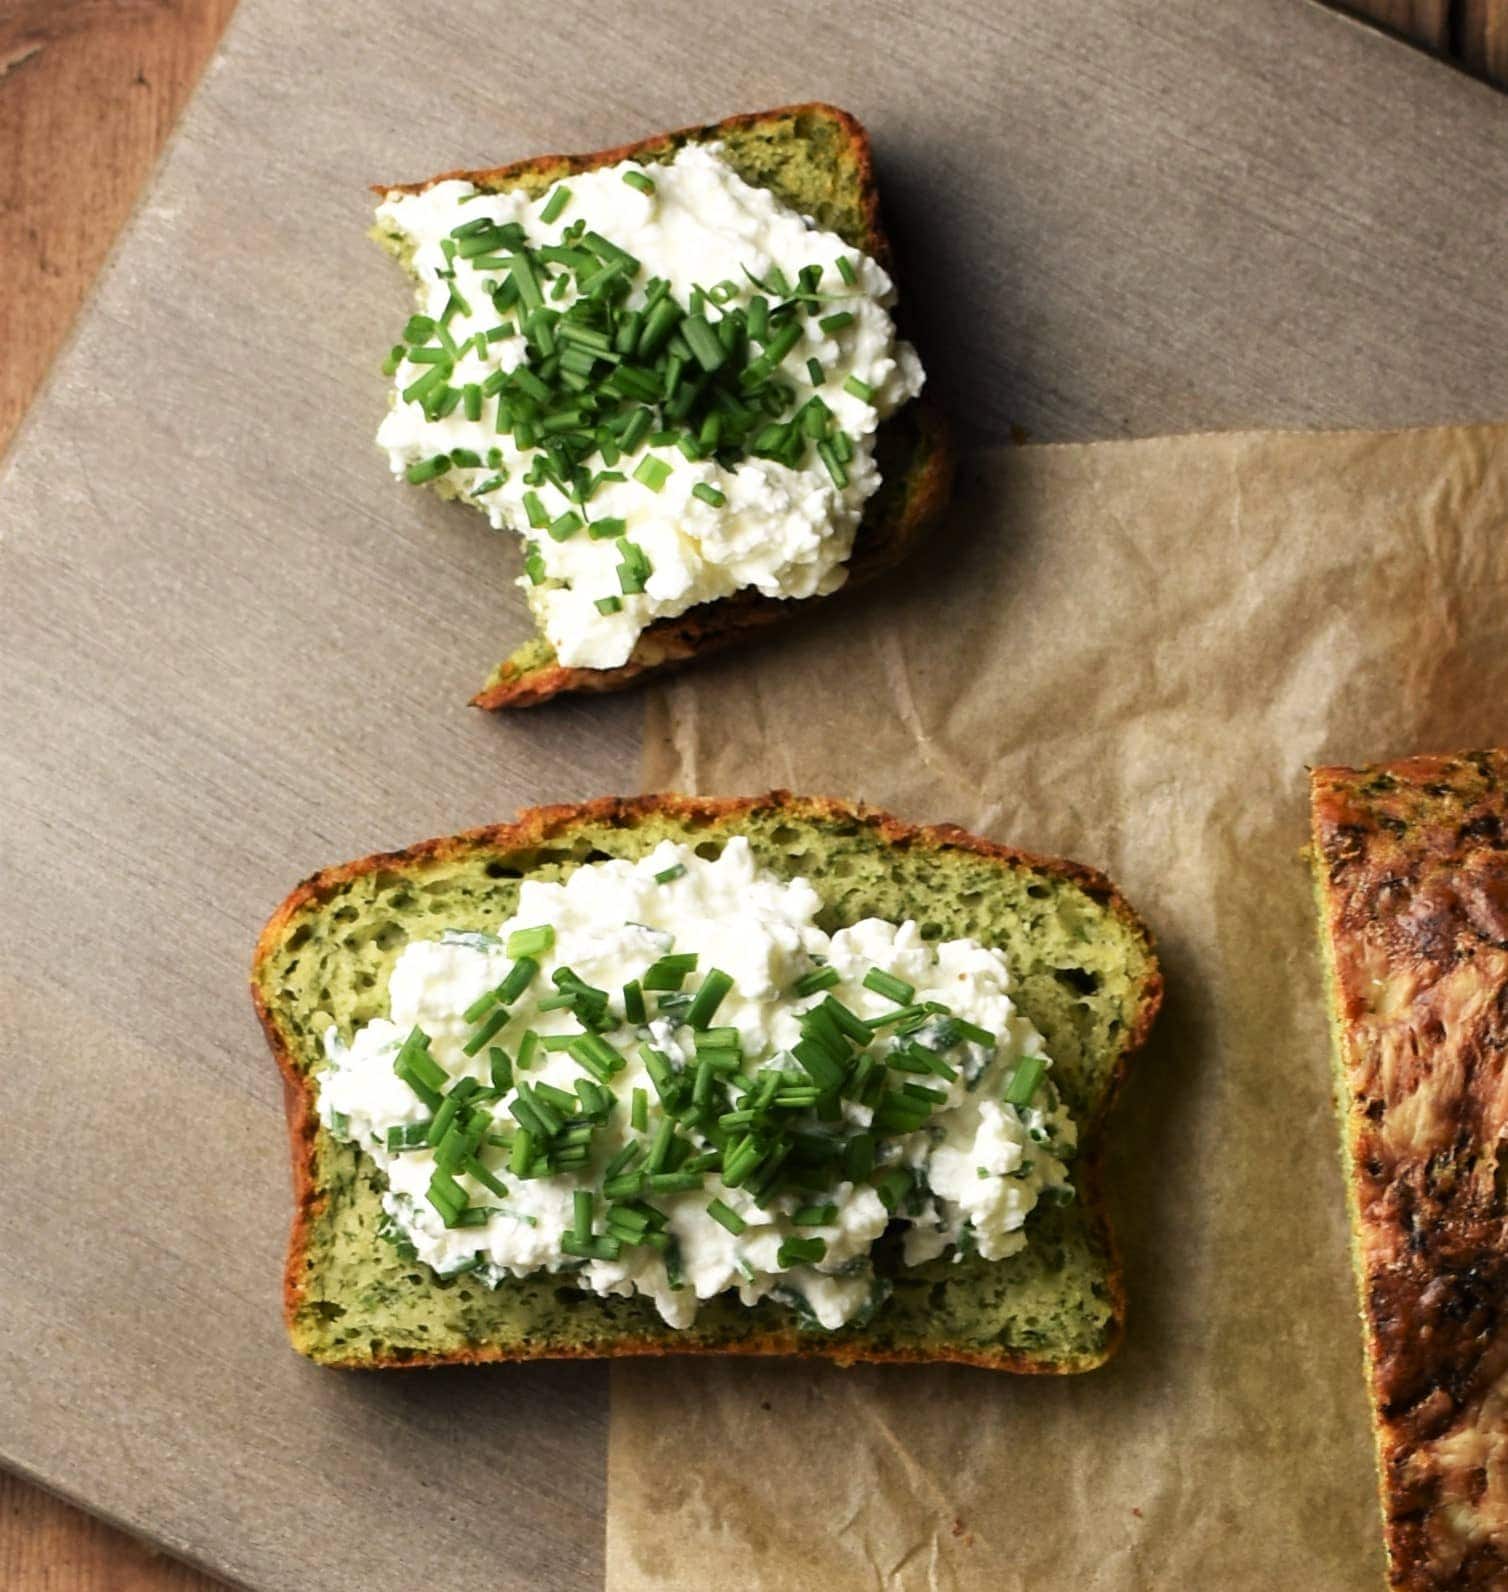 Spinach bread slices topped with cottage cheese and chives.